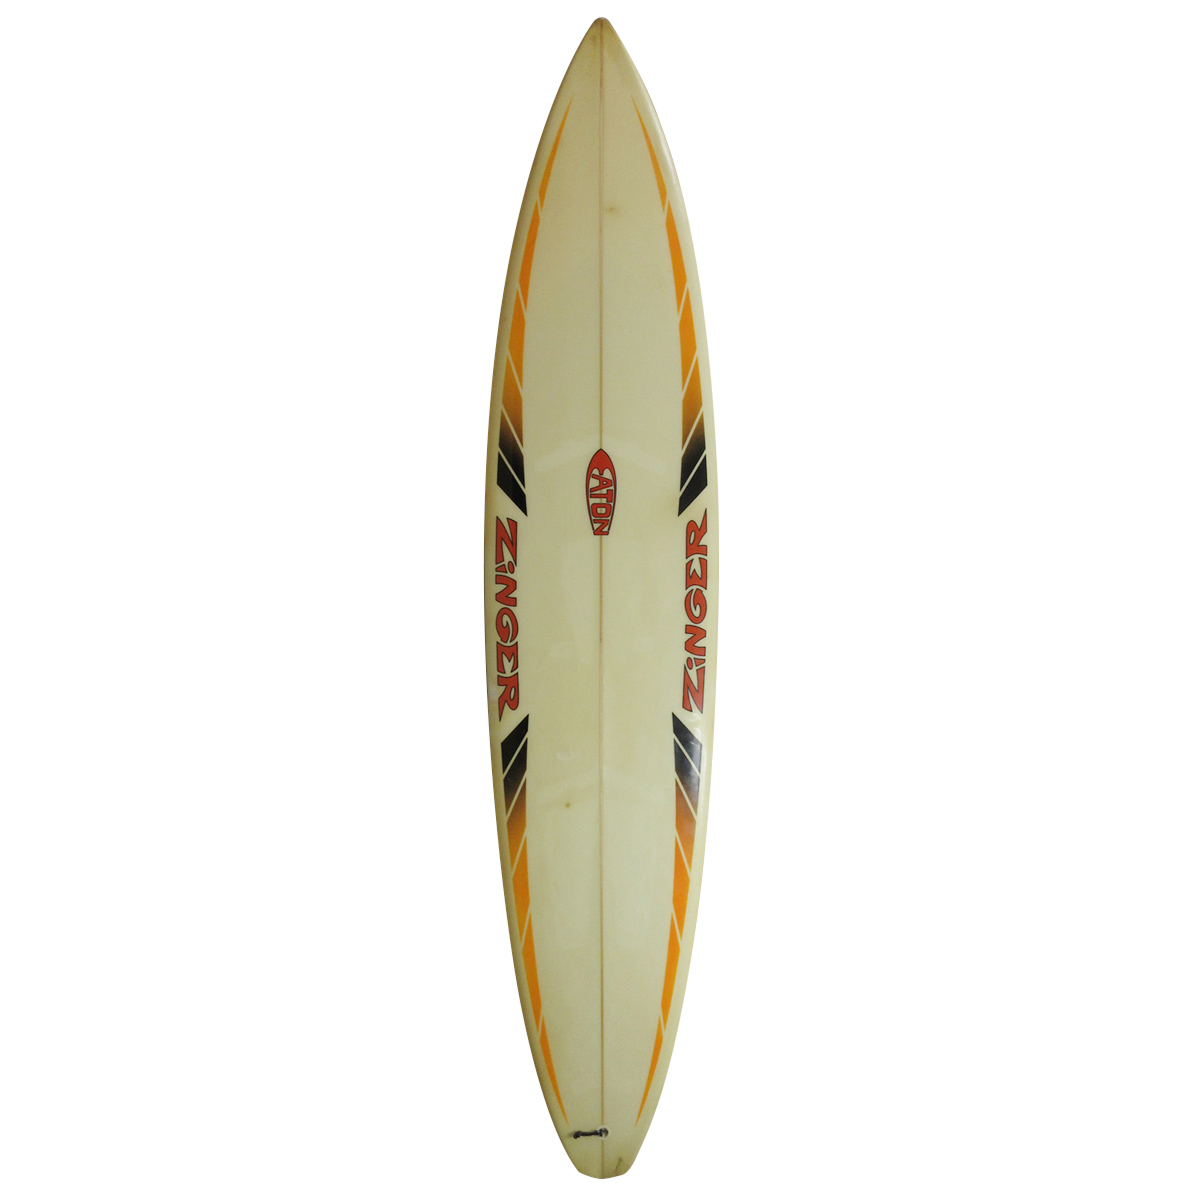  / EATON SURFBOARDS / 9`1 Original Zinger Shaped By Mike Eaton 